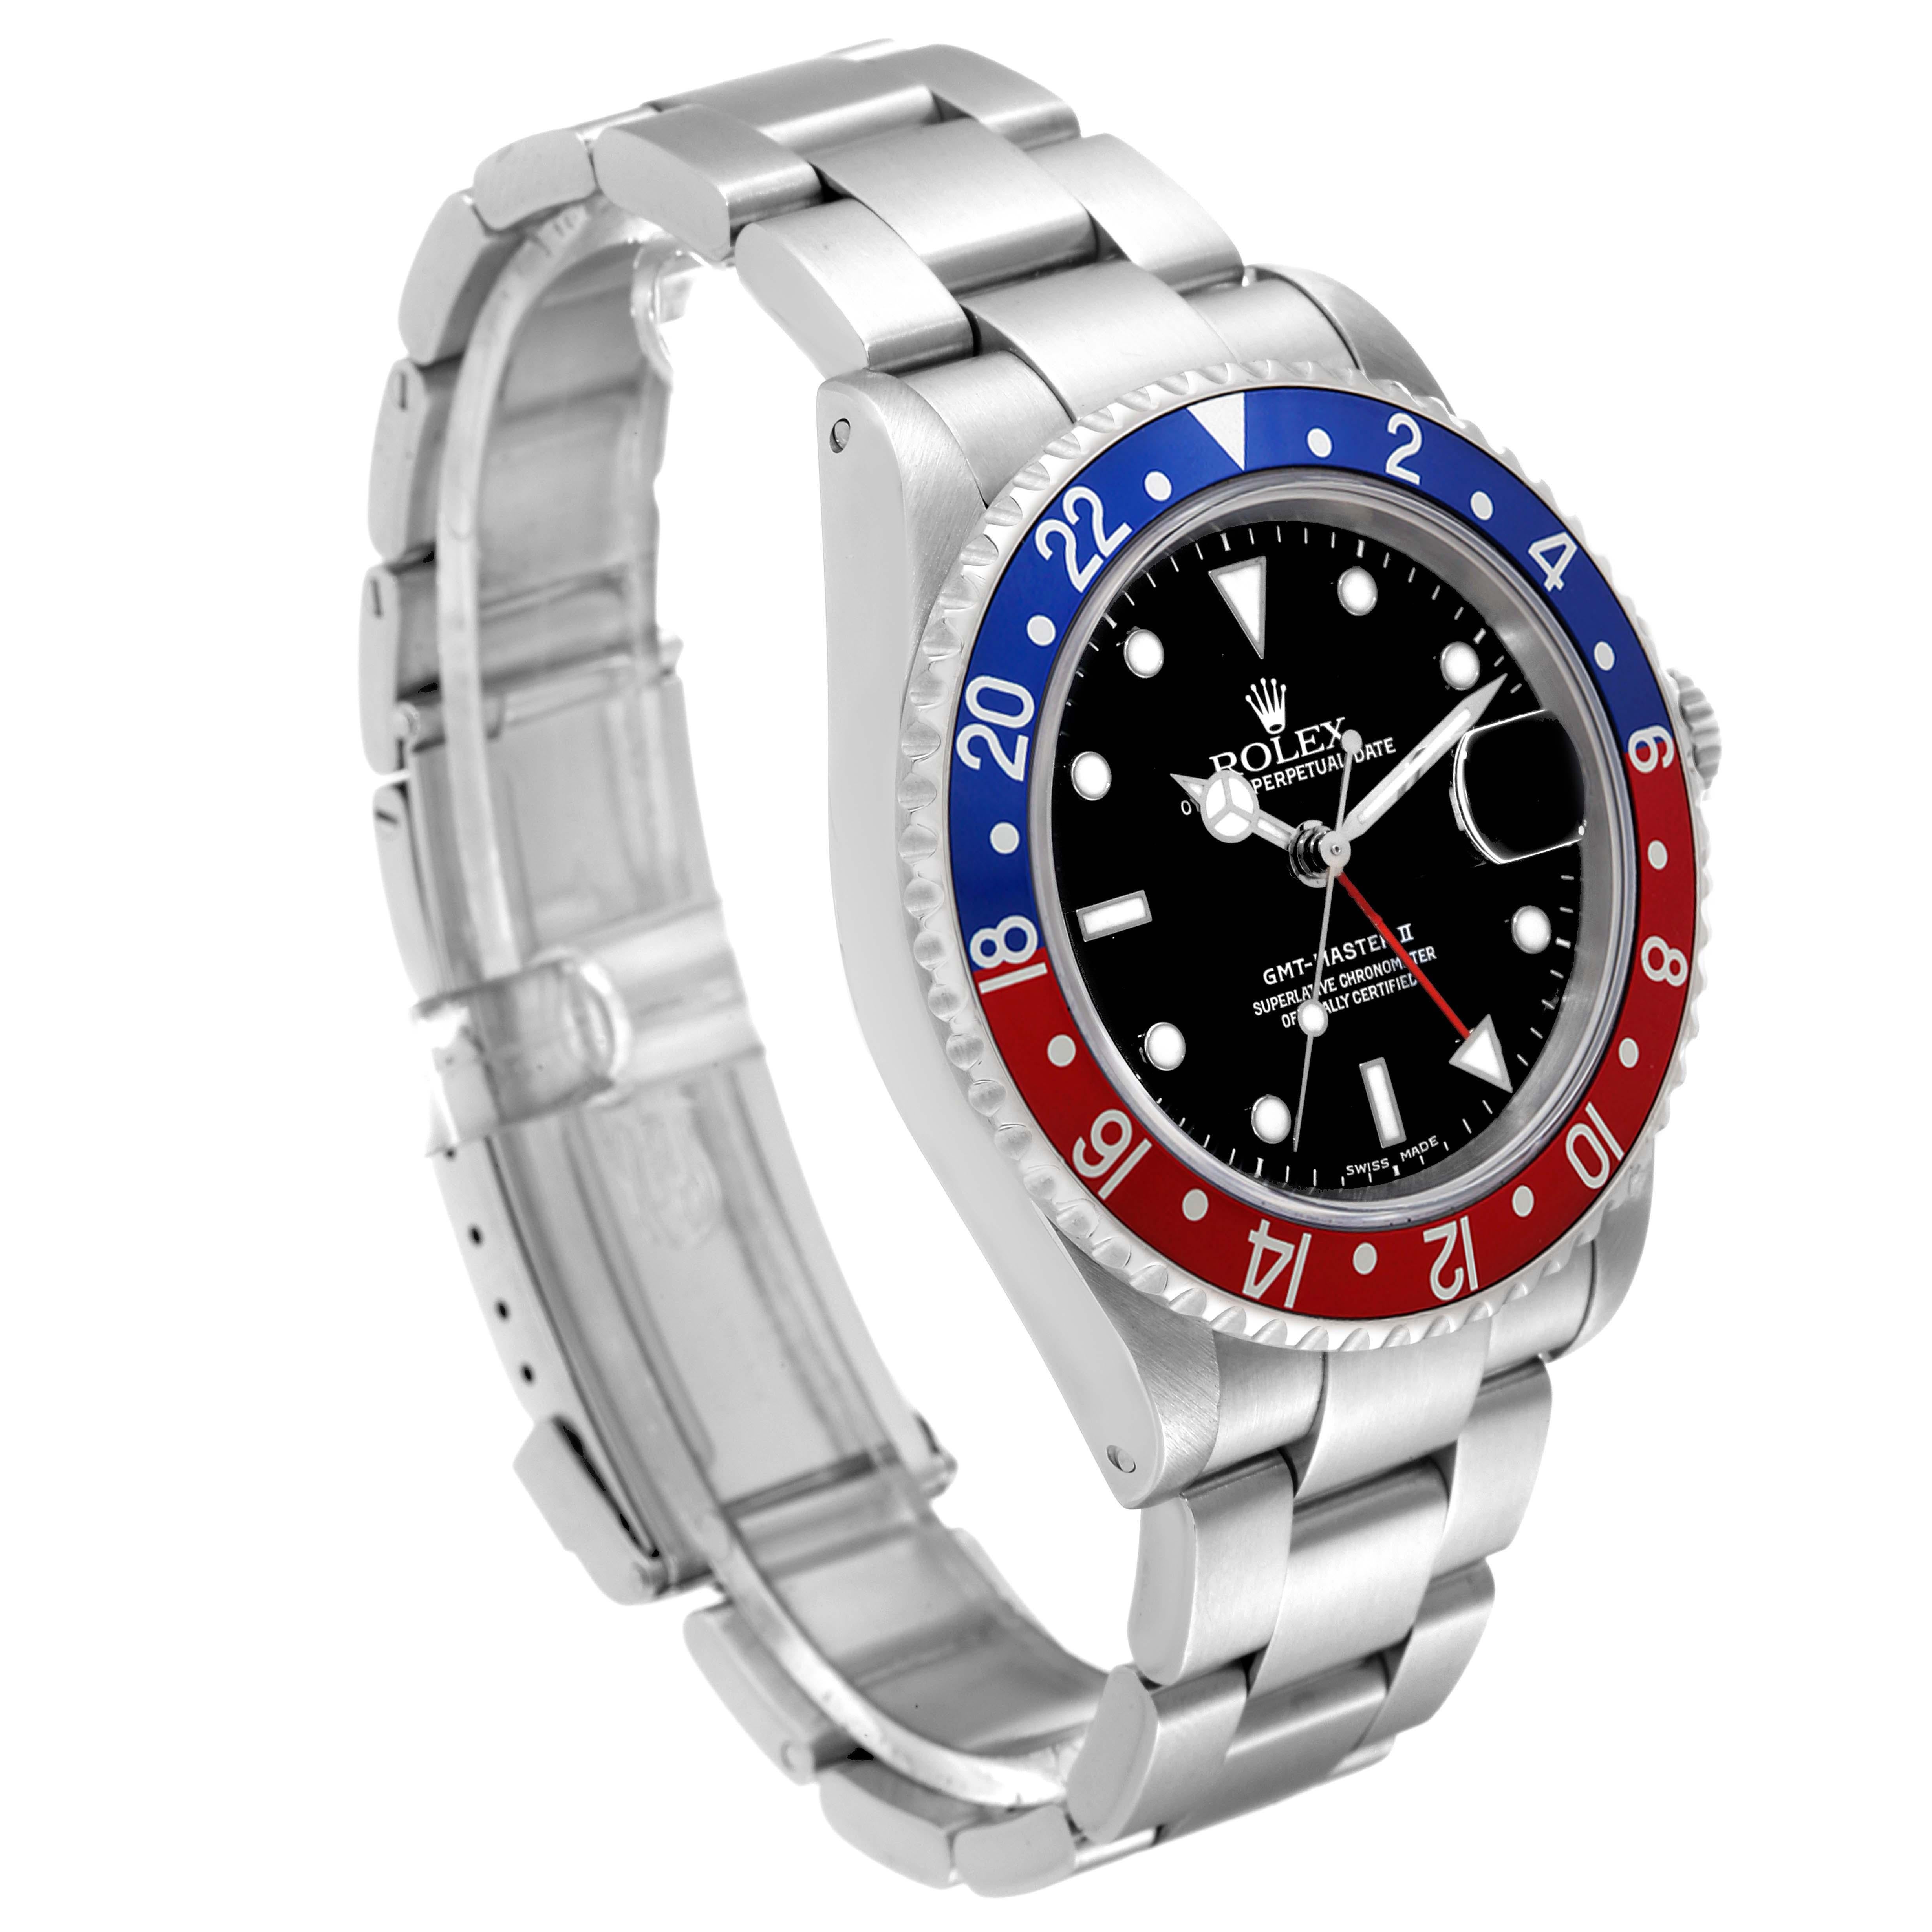  Rolex GMT Master II Blue Red Pepsi Bezel Steel Mens Watch 16710 Box Papers Pour hommes 